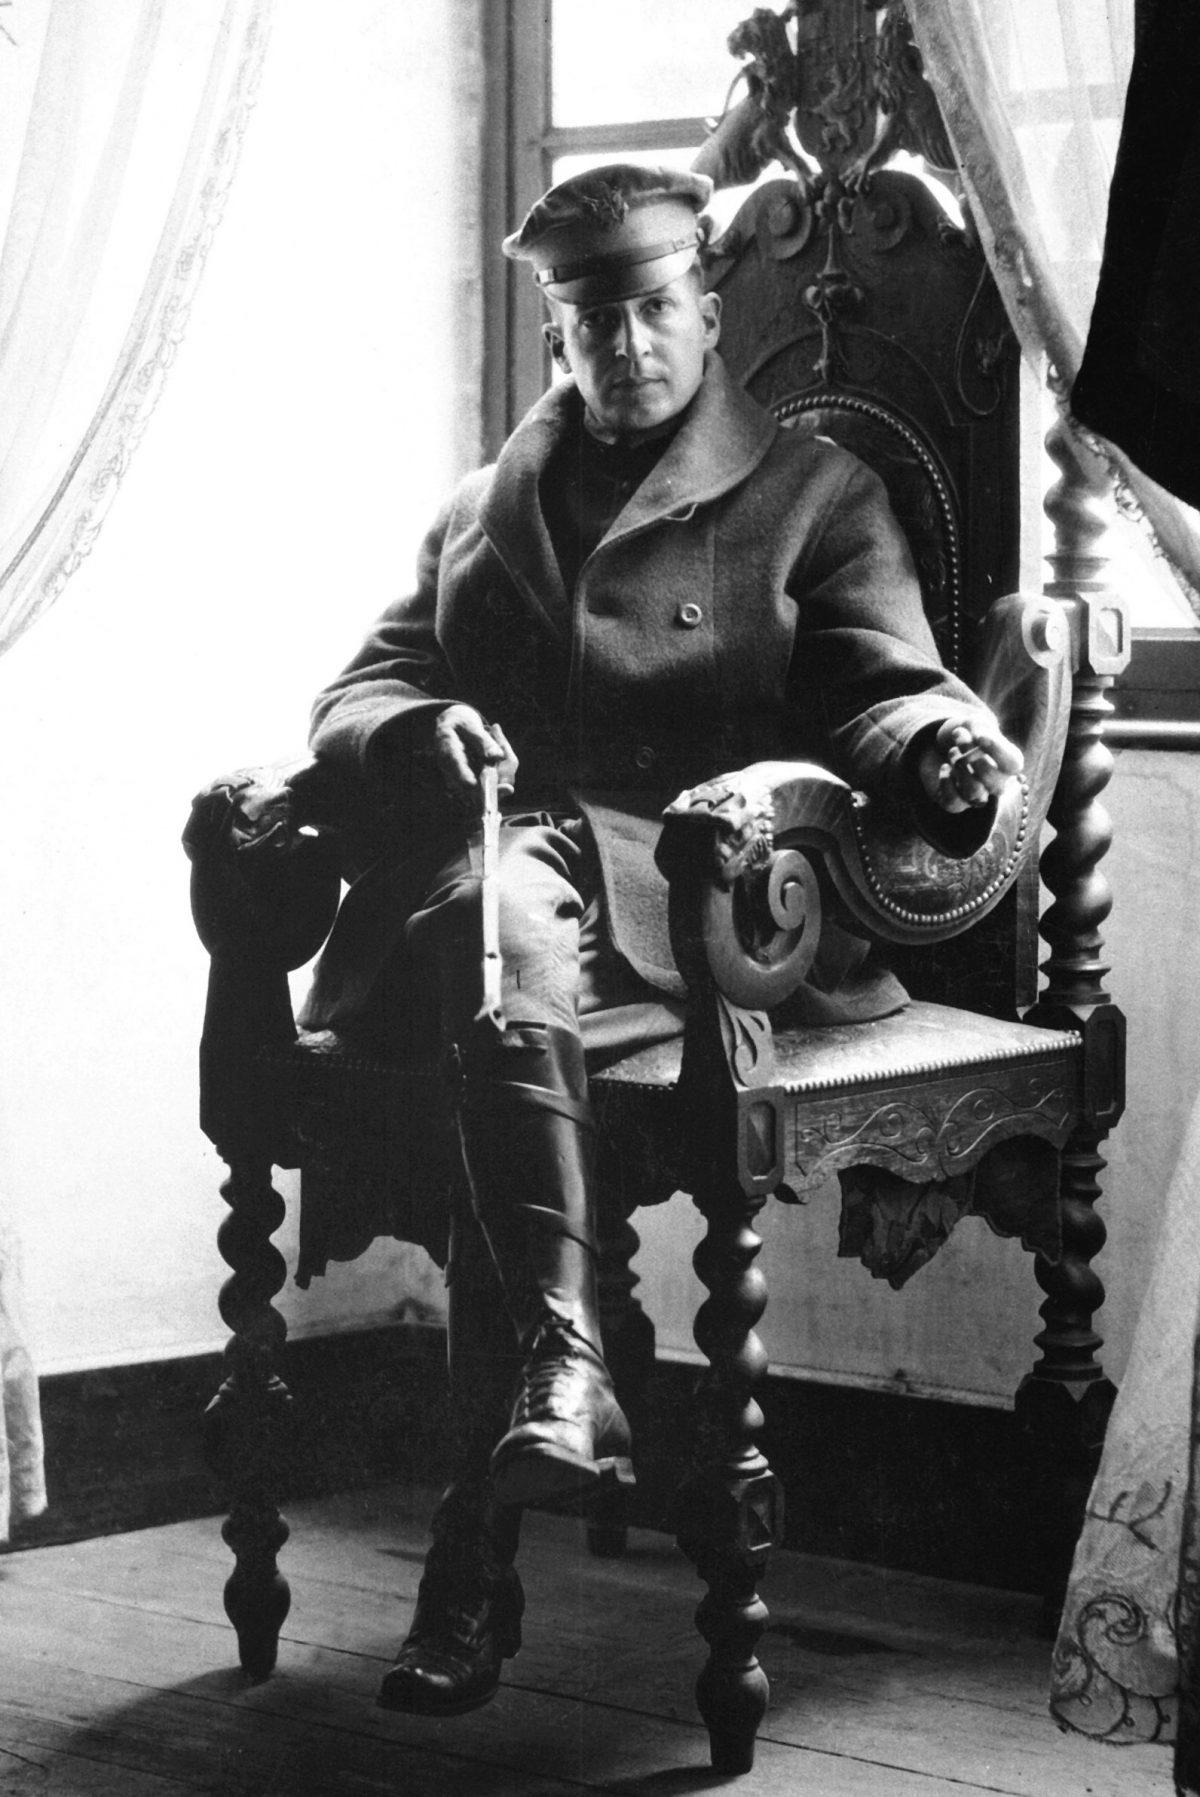 Brigadier General MacArthur at a French château, September 1918. (Public Domain)